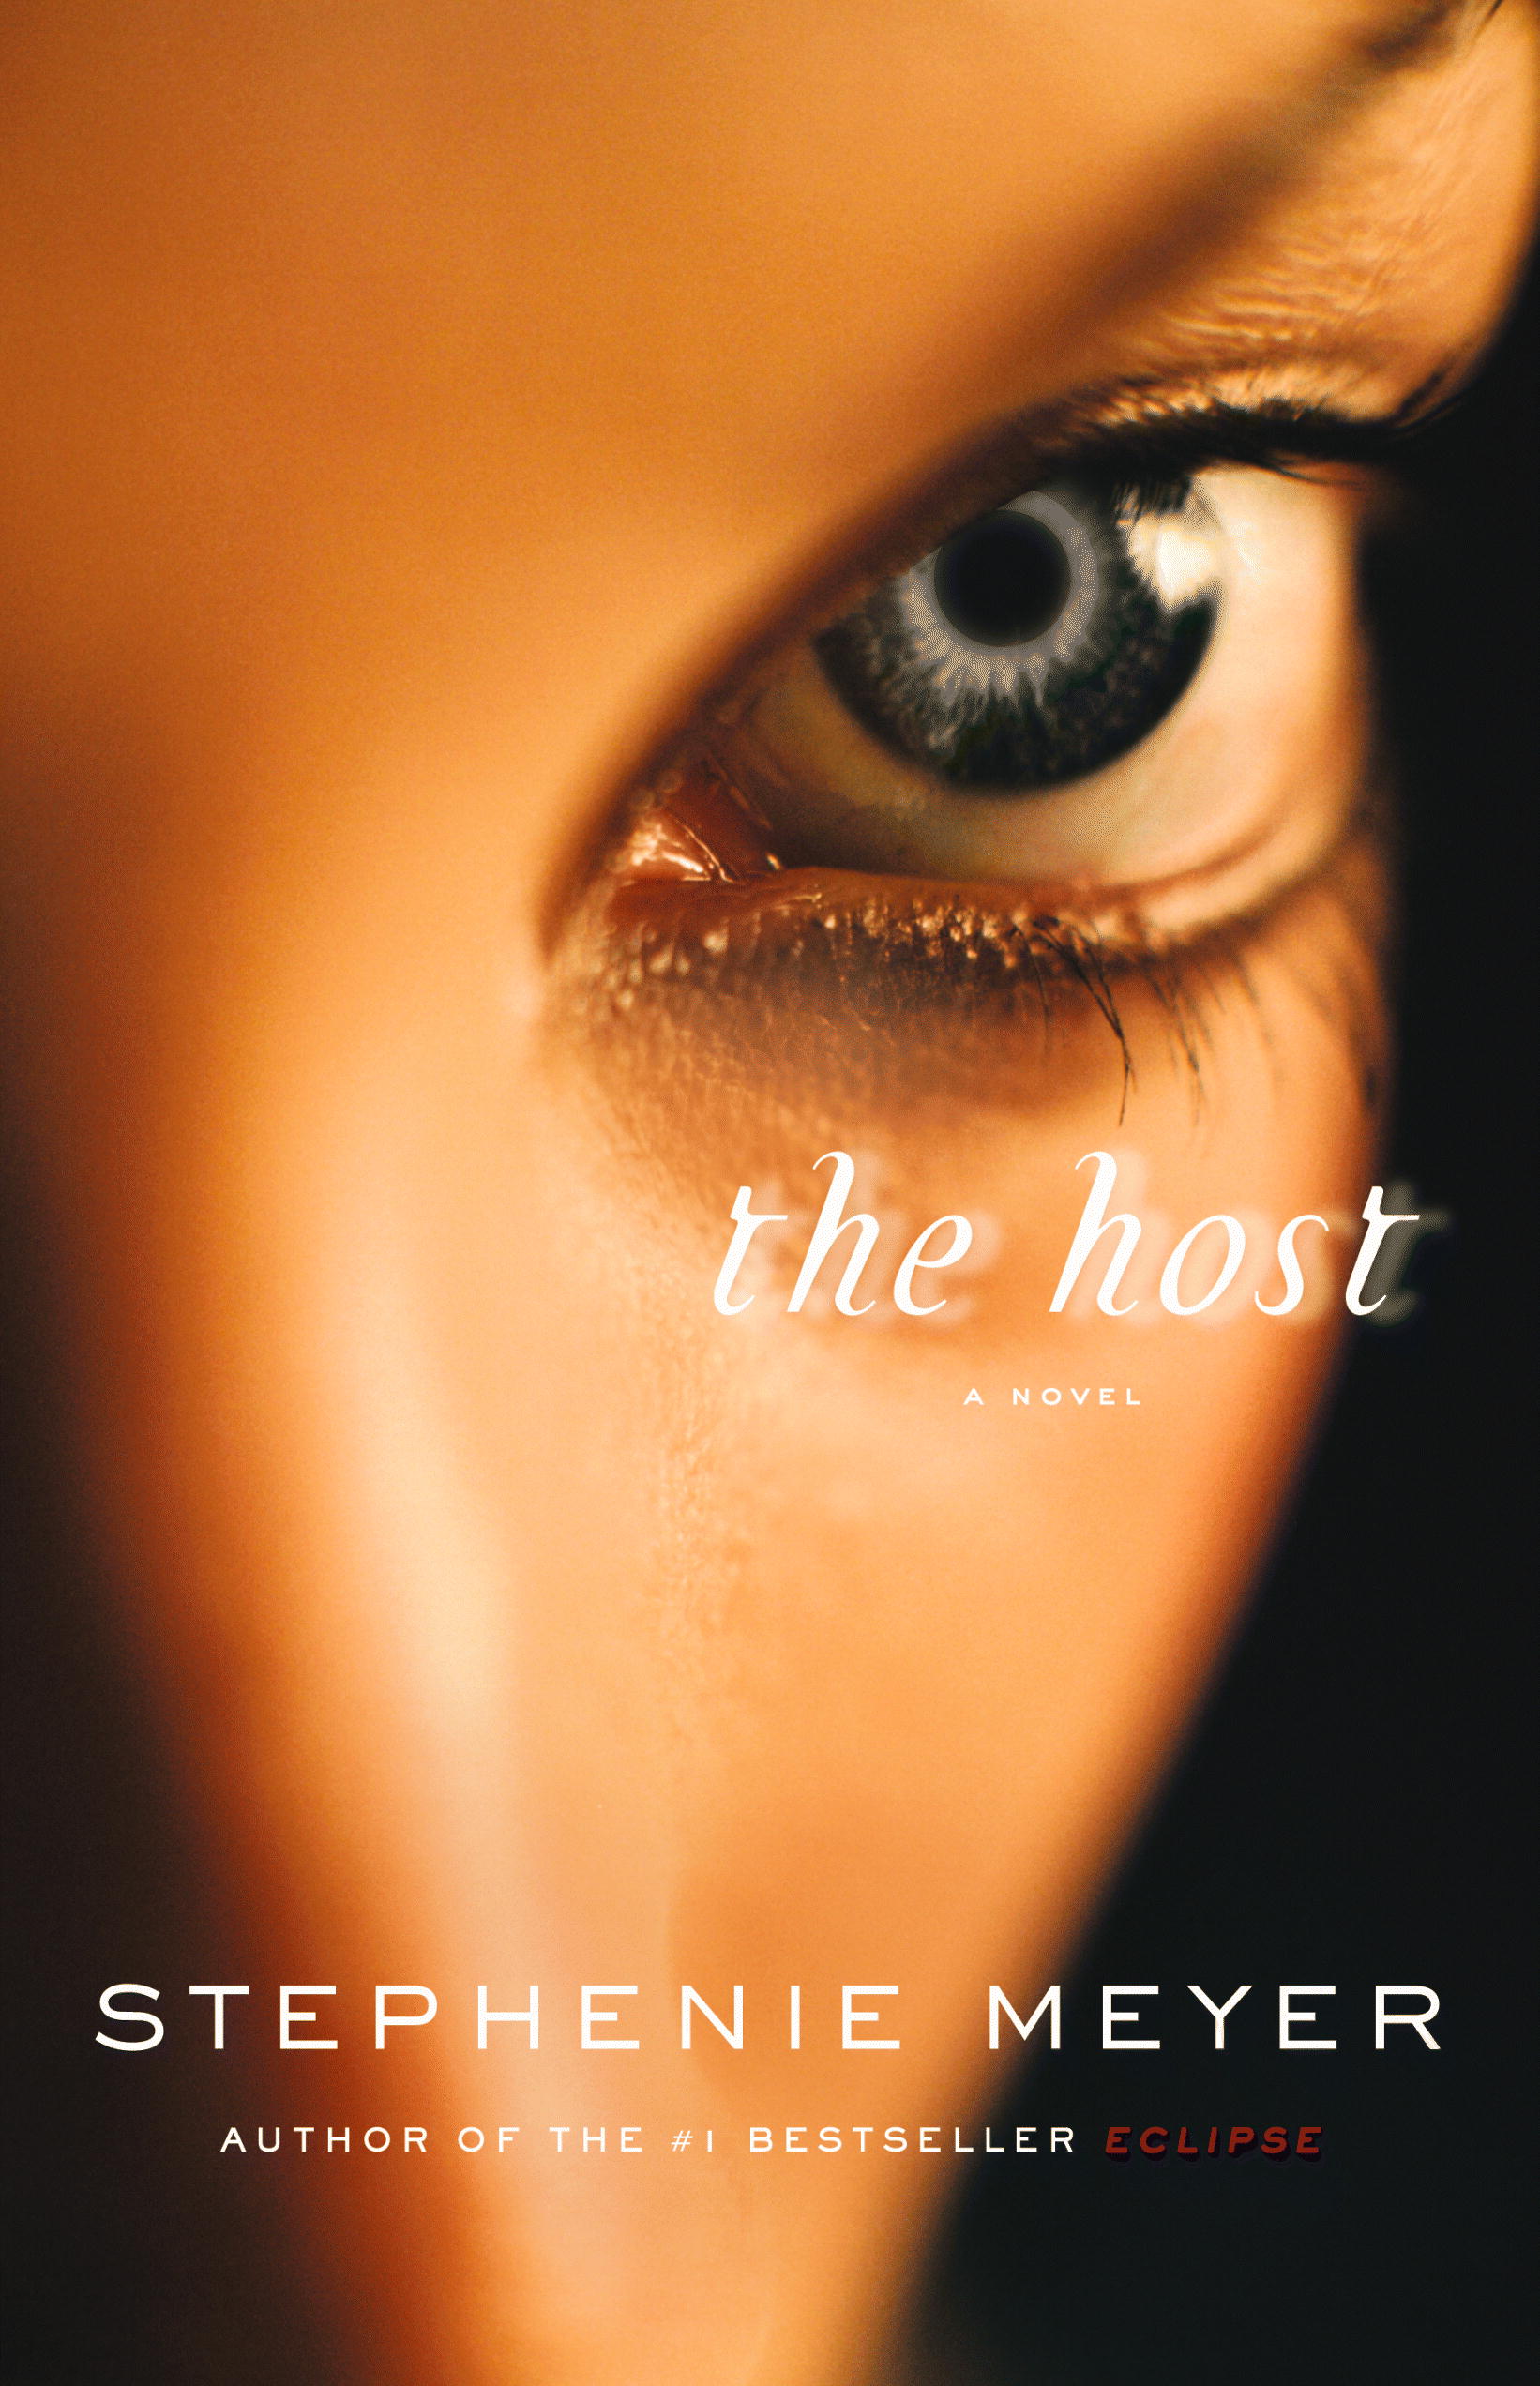 The Host book cover at http://stepheniemeyer.com/project/the-host-book/